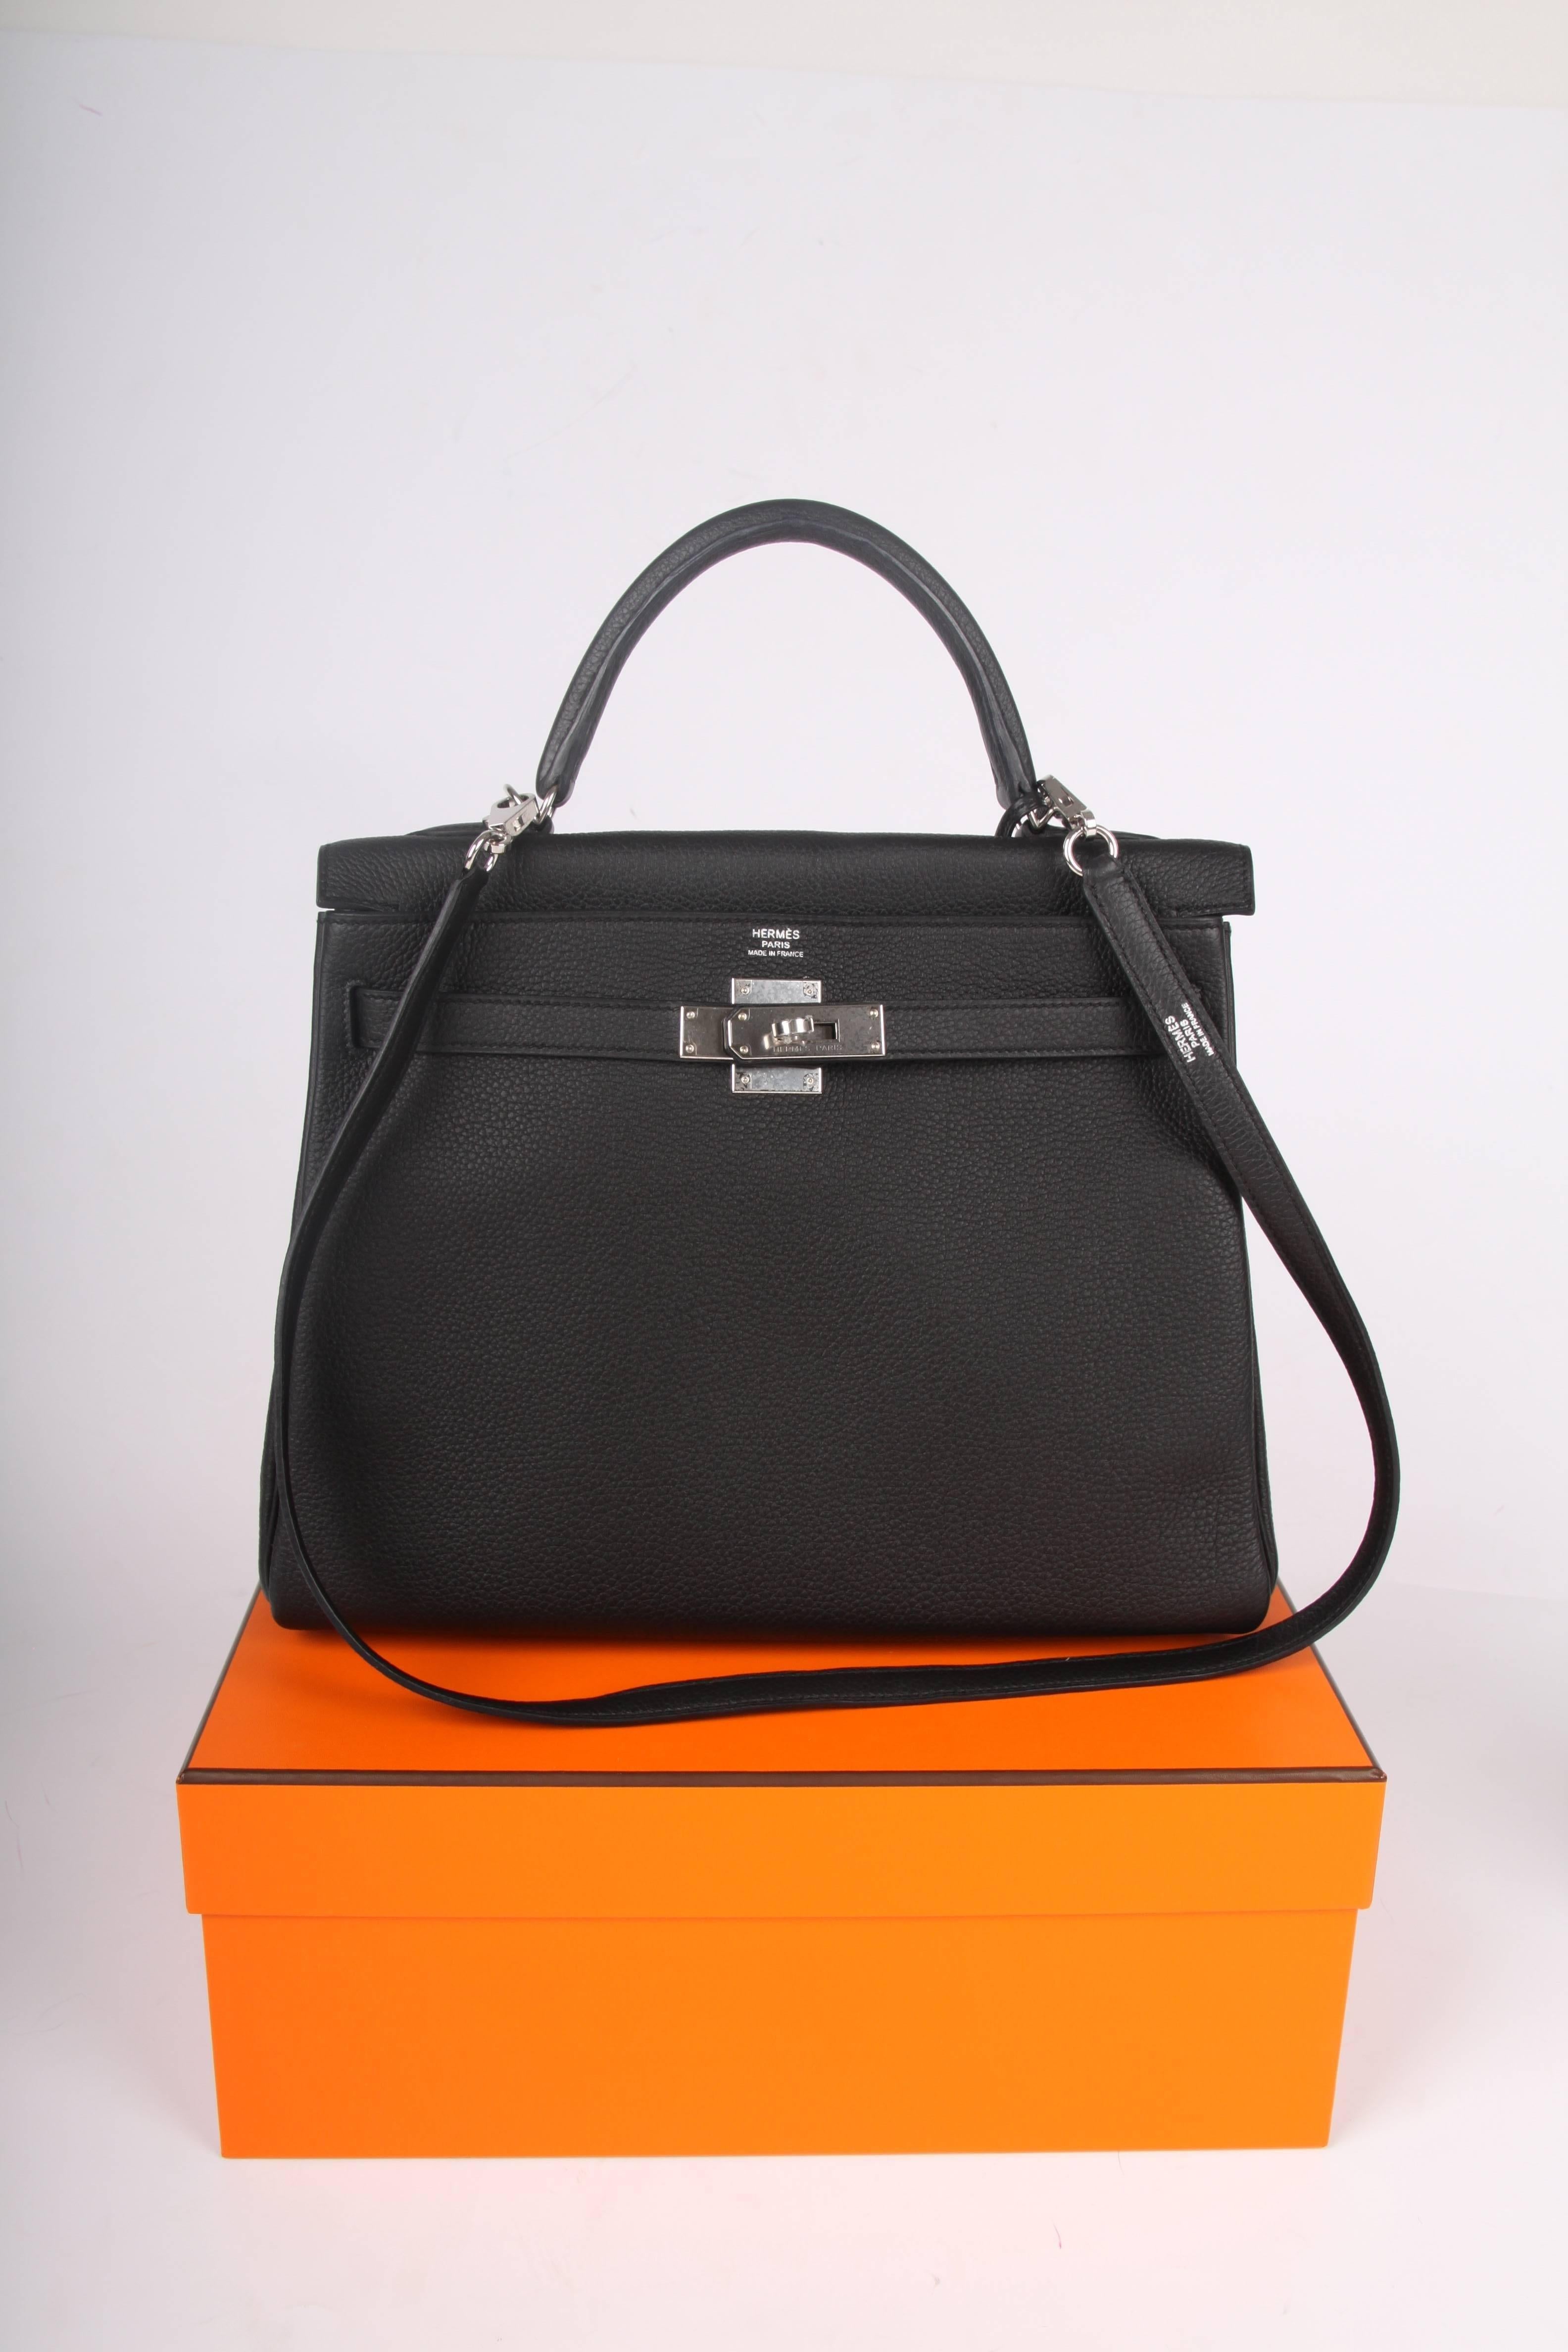 Yessss! Another beautiful Hermès bag in store! This is the Hermès Kelly 32 crafted of black Togo leather.

On the inside there are three flat pockets, one of them has a Hermès zipper with a leather tab. The tab has to be in a straight line with the